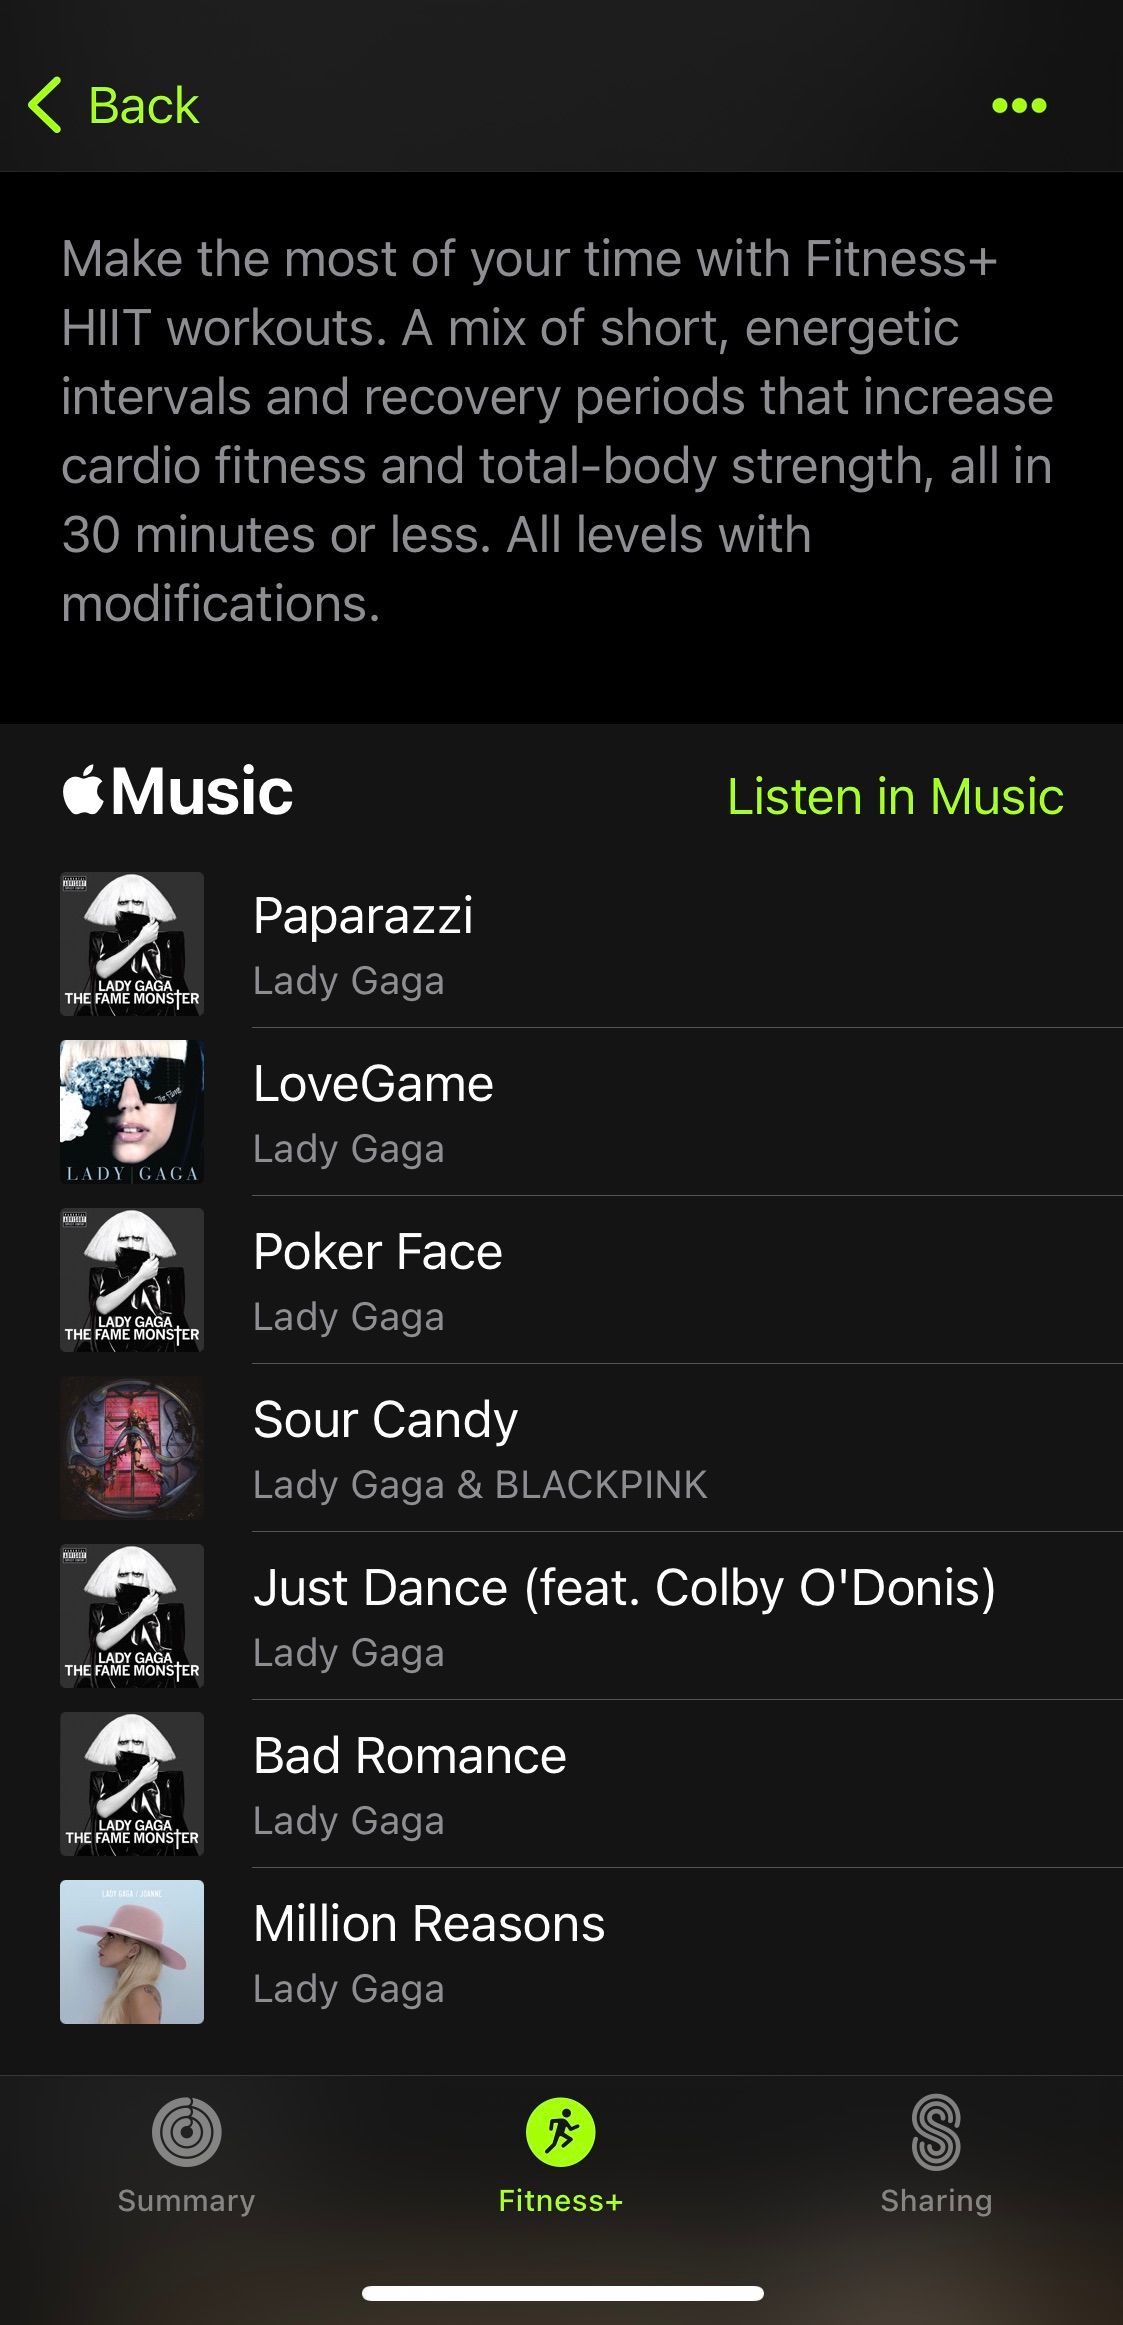 Screenshot from Apple Fitness+ app showing a HIIT playlist featuring Lady Gaga